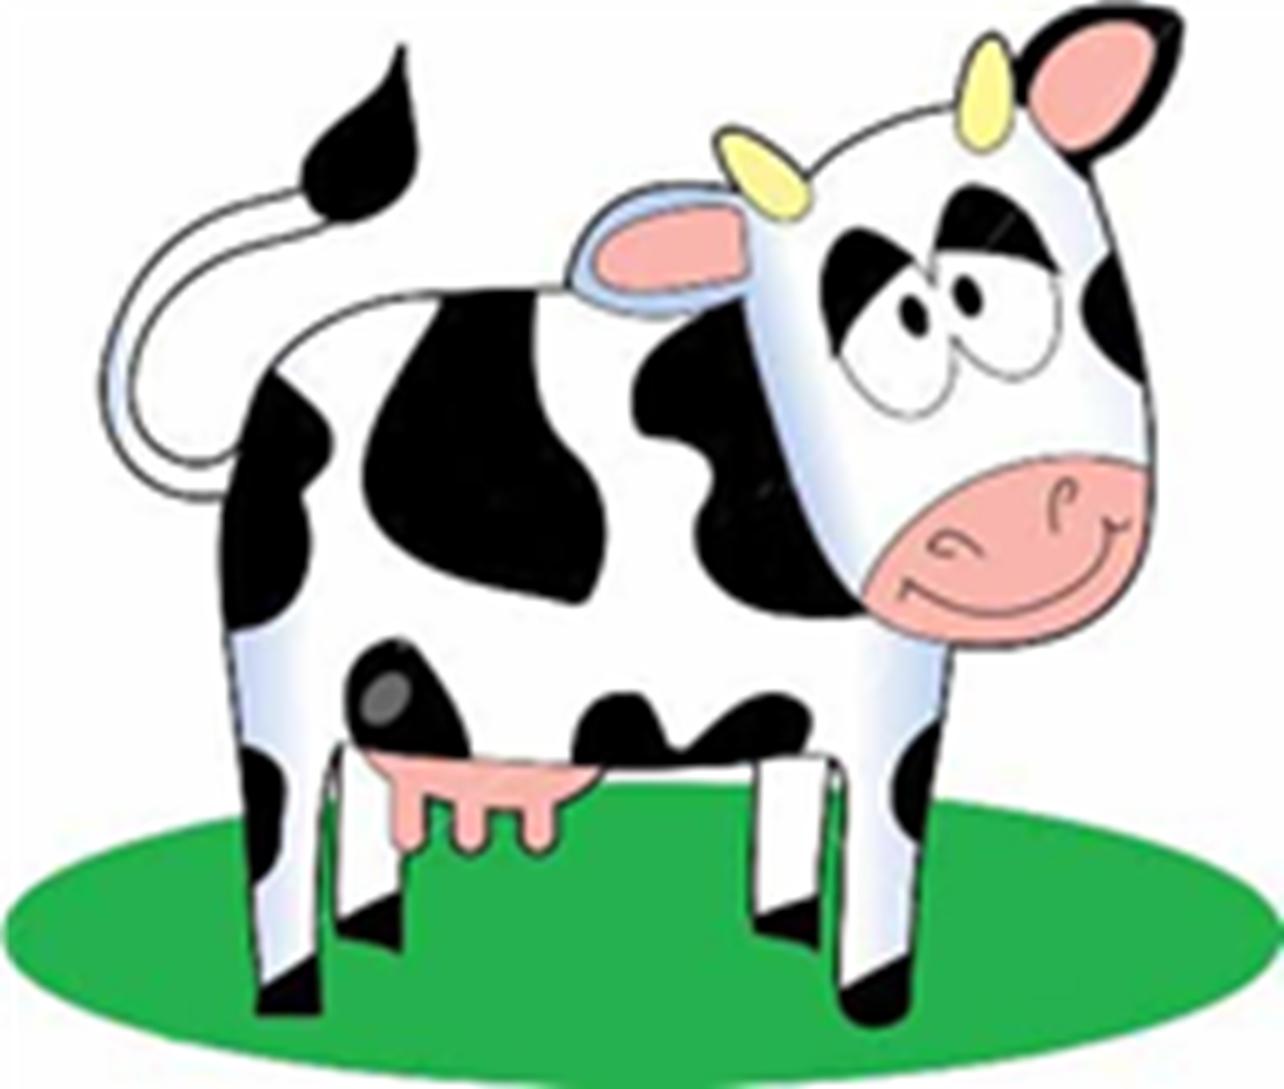 Cow Plop Bingo is back – win $1,000 and support our kids ...